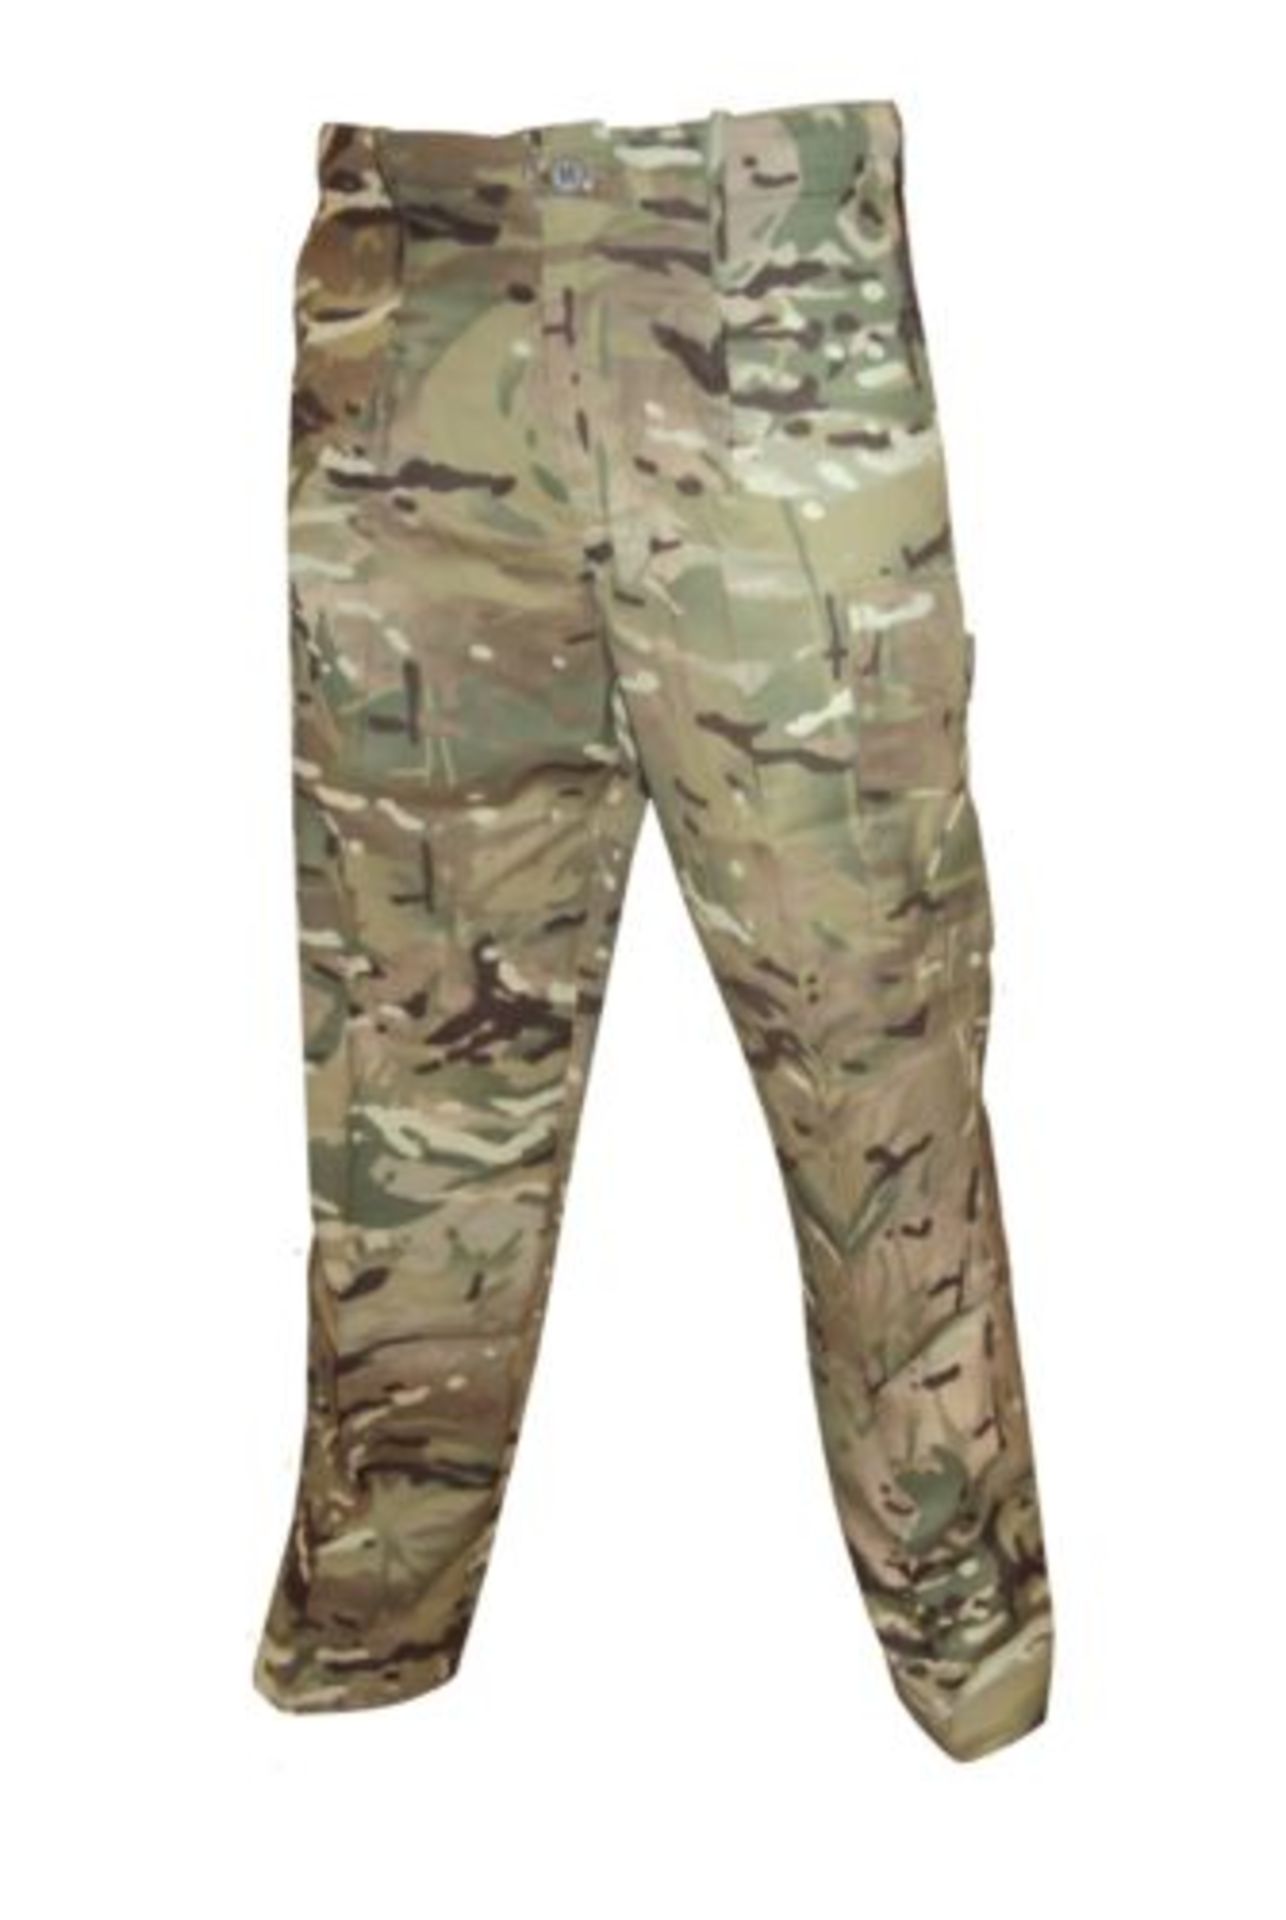 PACK OF 5 - MTP TROUSERS - BRAND NEW - MIXED SIZES